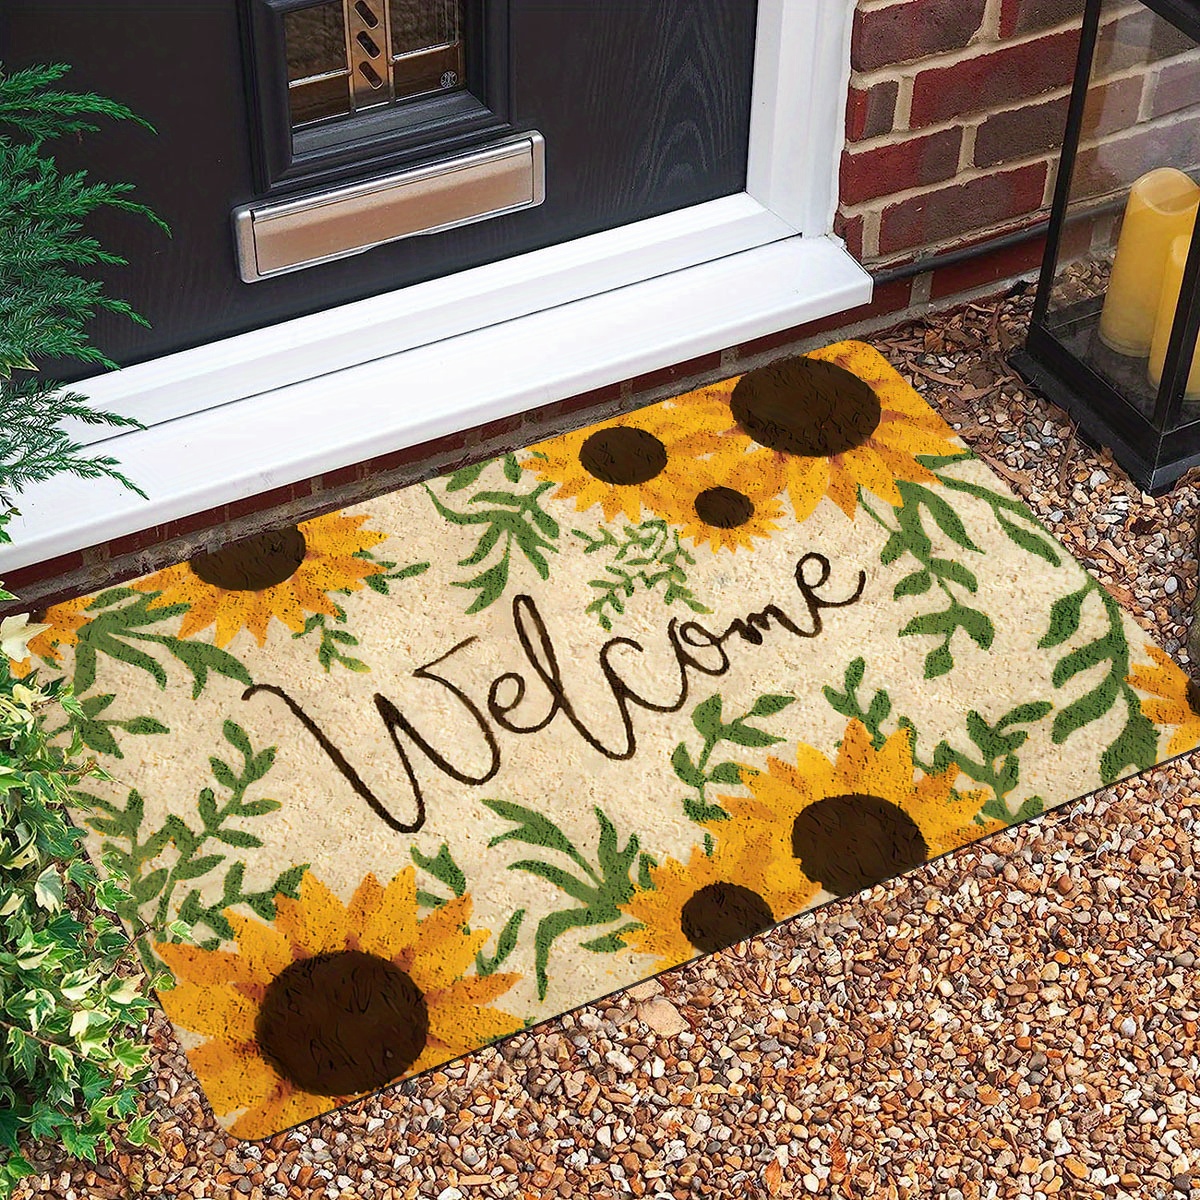 

floral Charm" Sunflower Welcome Home Door Mat - Non-slip, Stain-resistant Polyester Rug With Plush Flannel Top & Sponge Backing For Laundry, Bathroom, Dining Decor